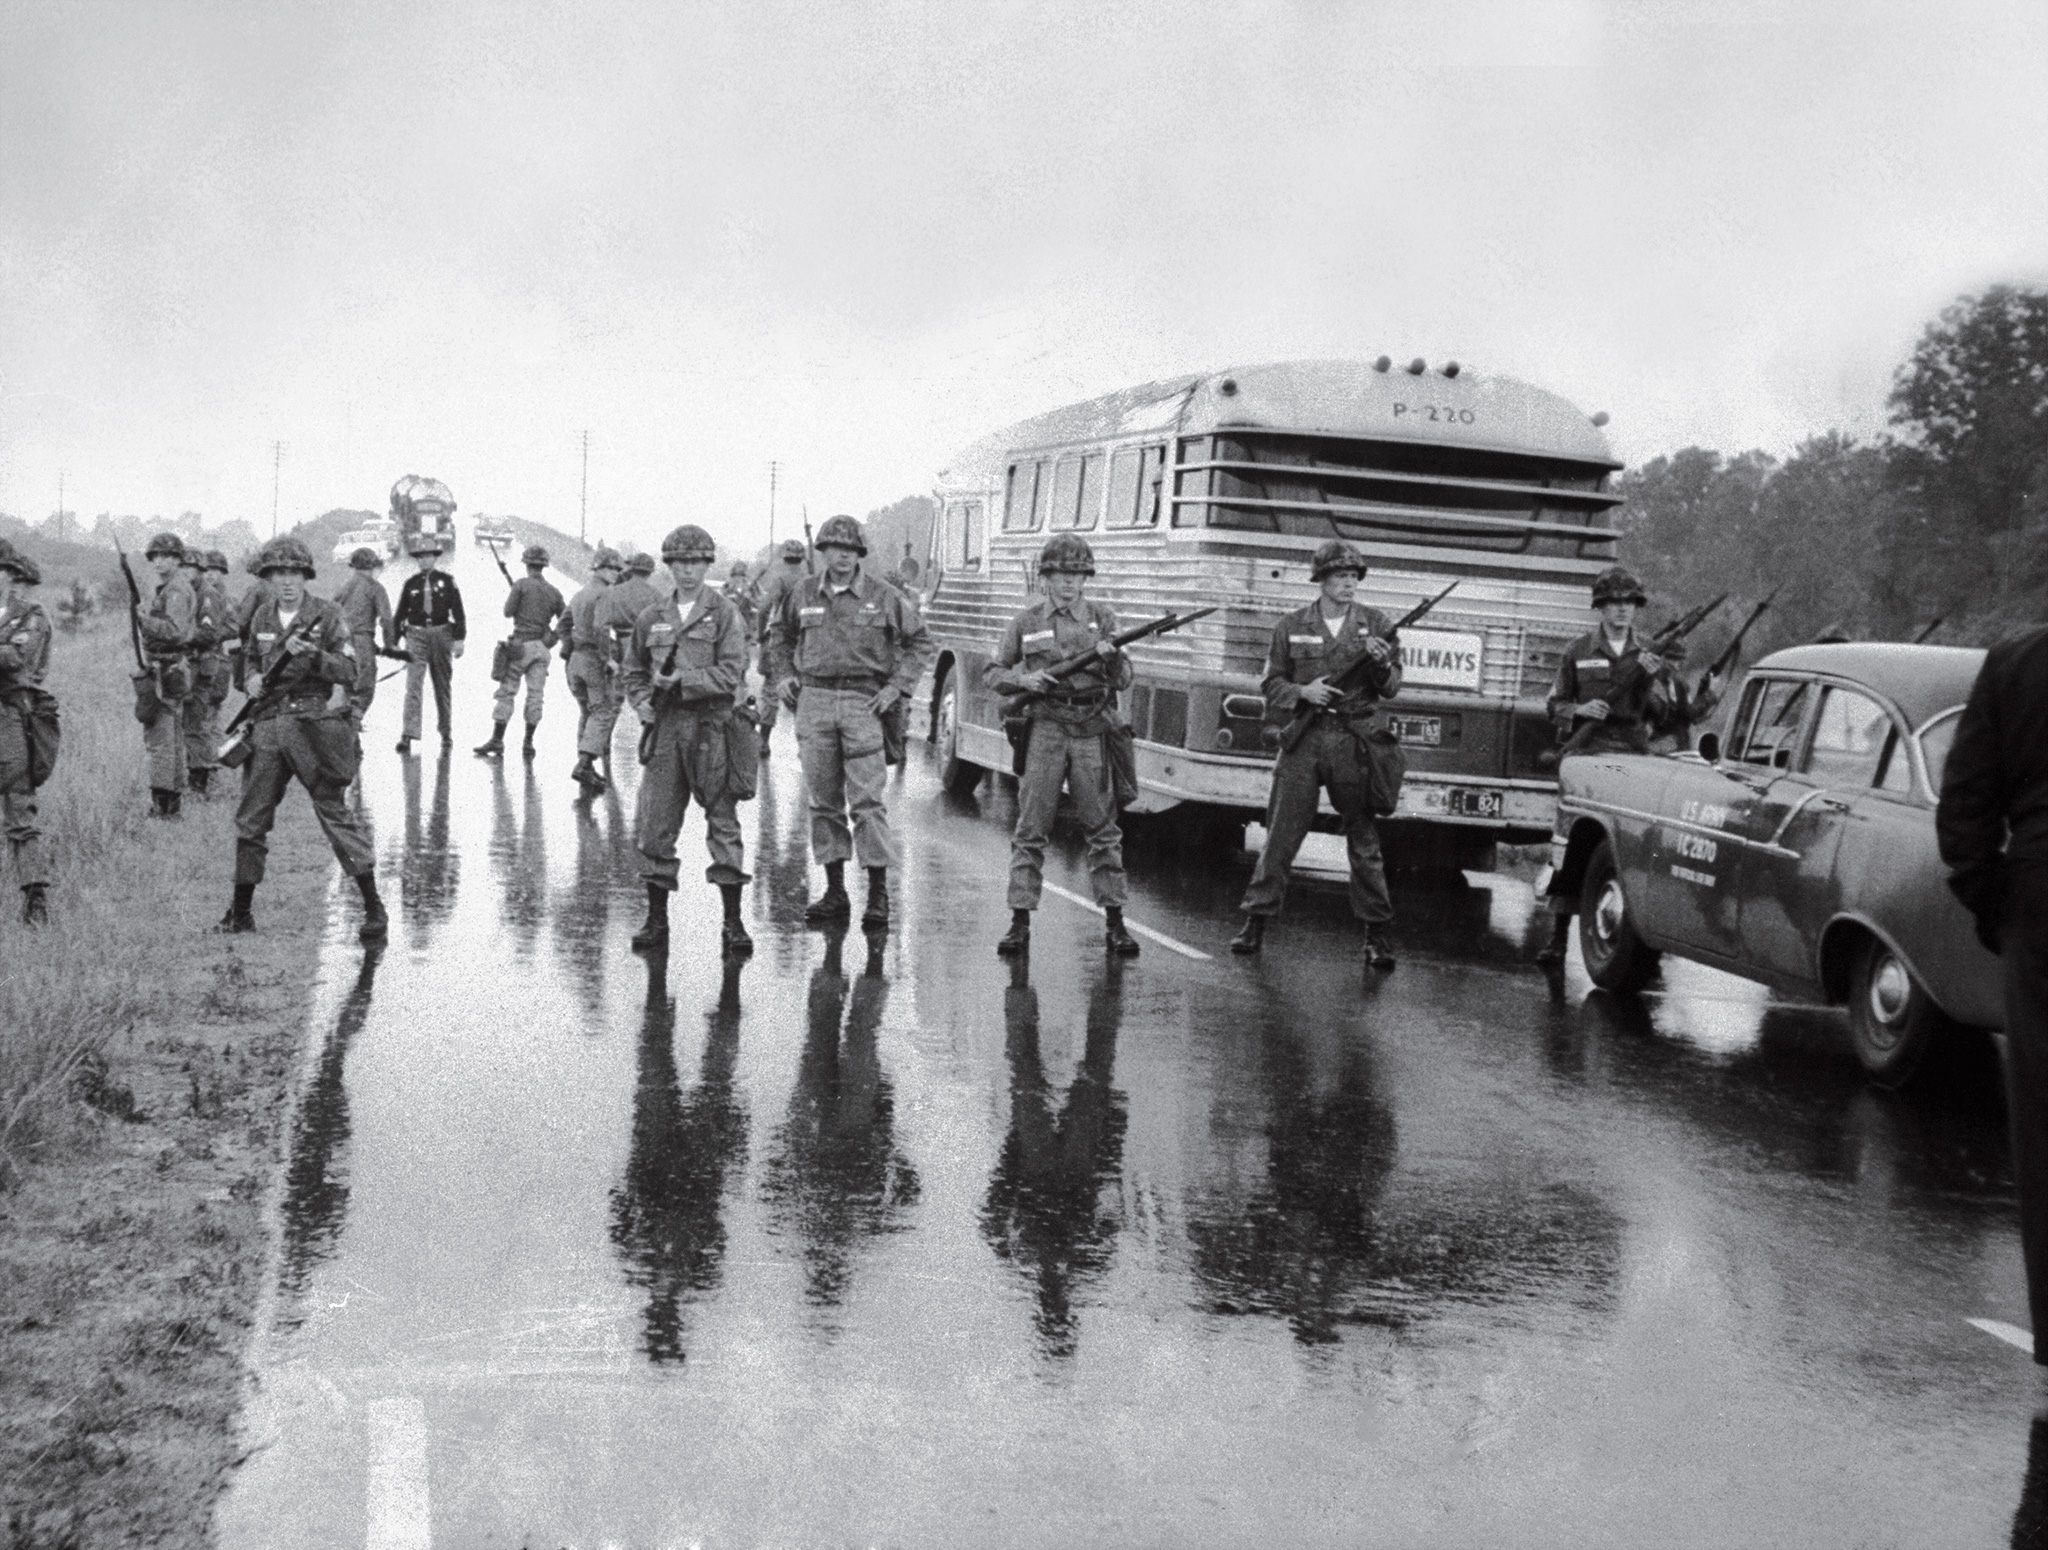 Near the Mississippi-Alabama border, members of the Alabama National Guard surround a bus carrying freedom riders, May 1961.